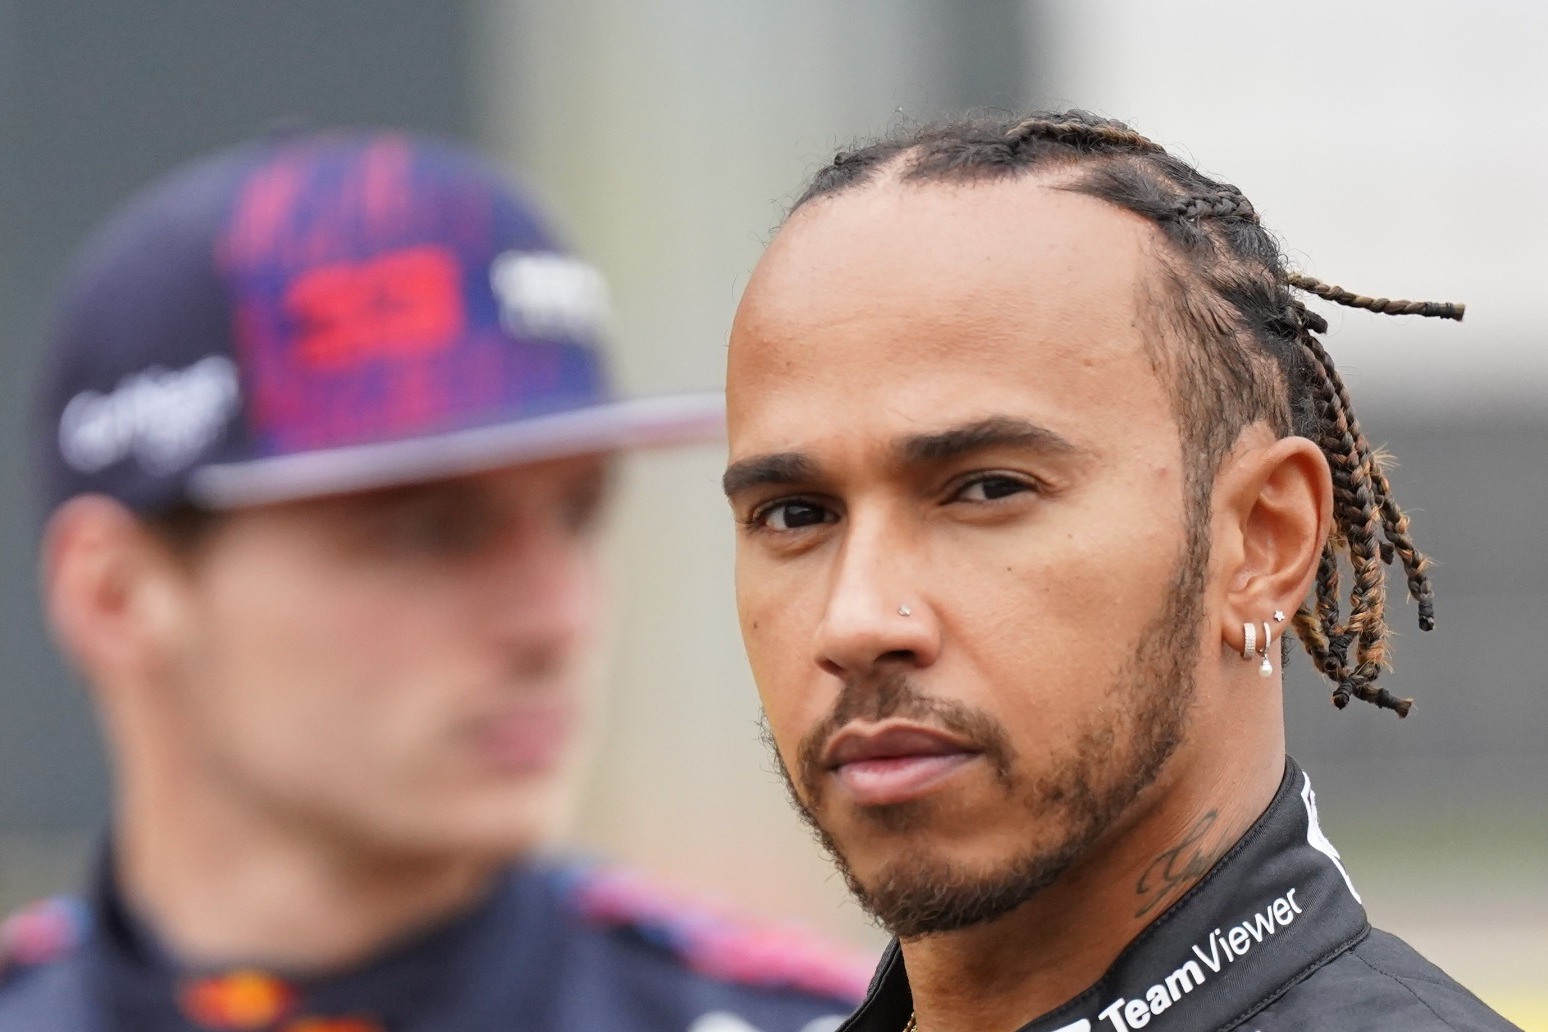 Lewis Hamilton: I have struggled mentally and emotionally for a long time 